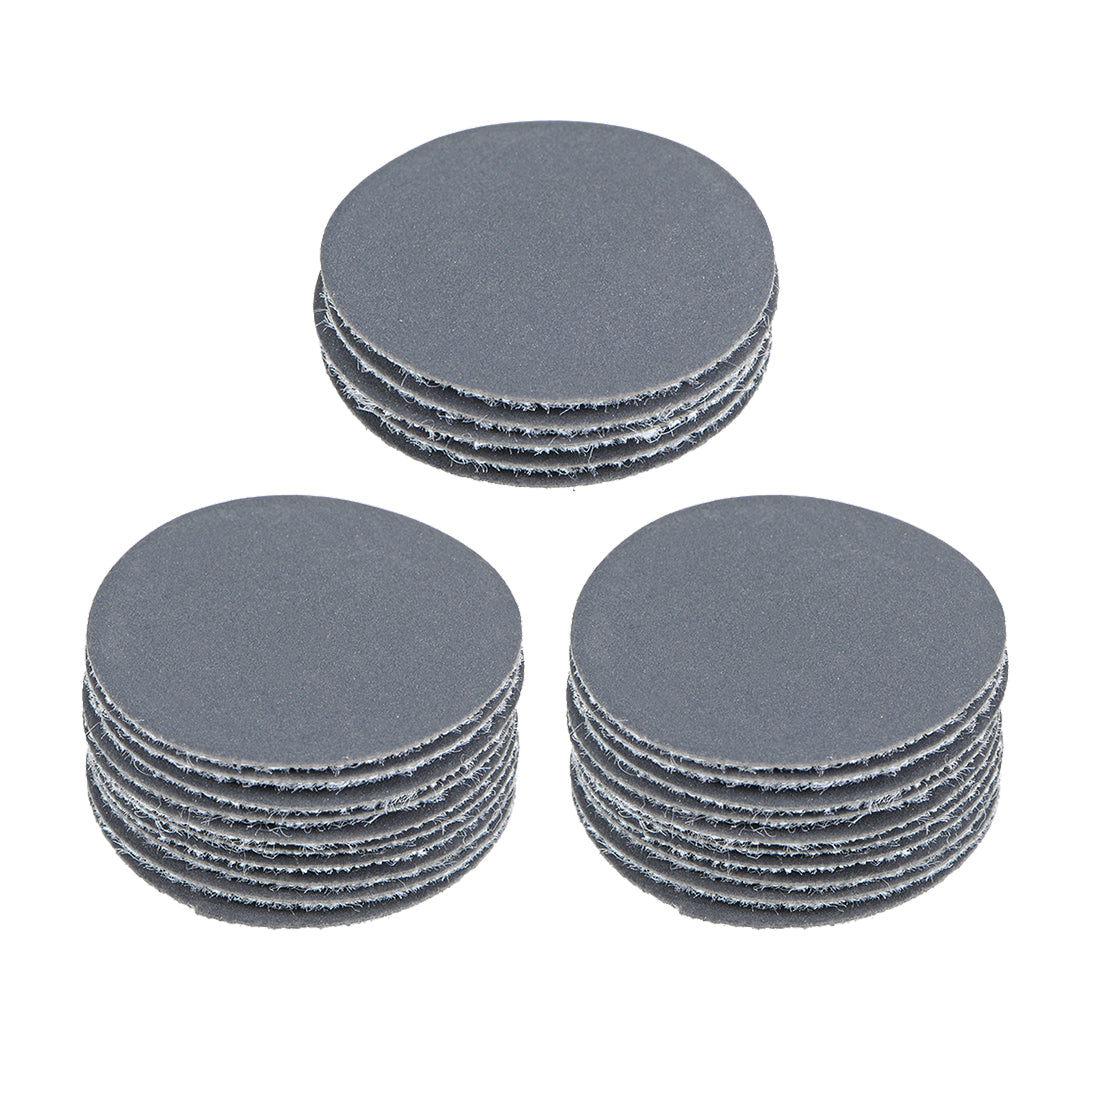 Uxcell Uxcell 1-Inch Hook and Loop Sanding Disc Wet / Dry Silicon Carbide 2500 Grit 25 Pcs